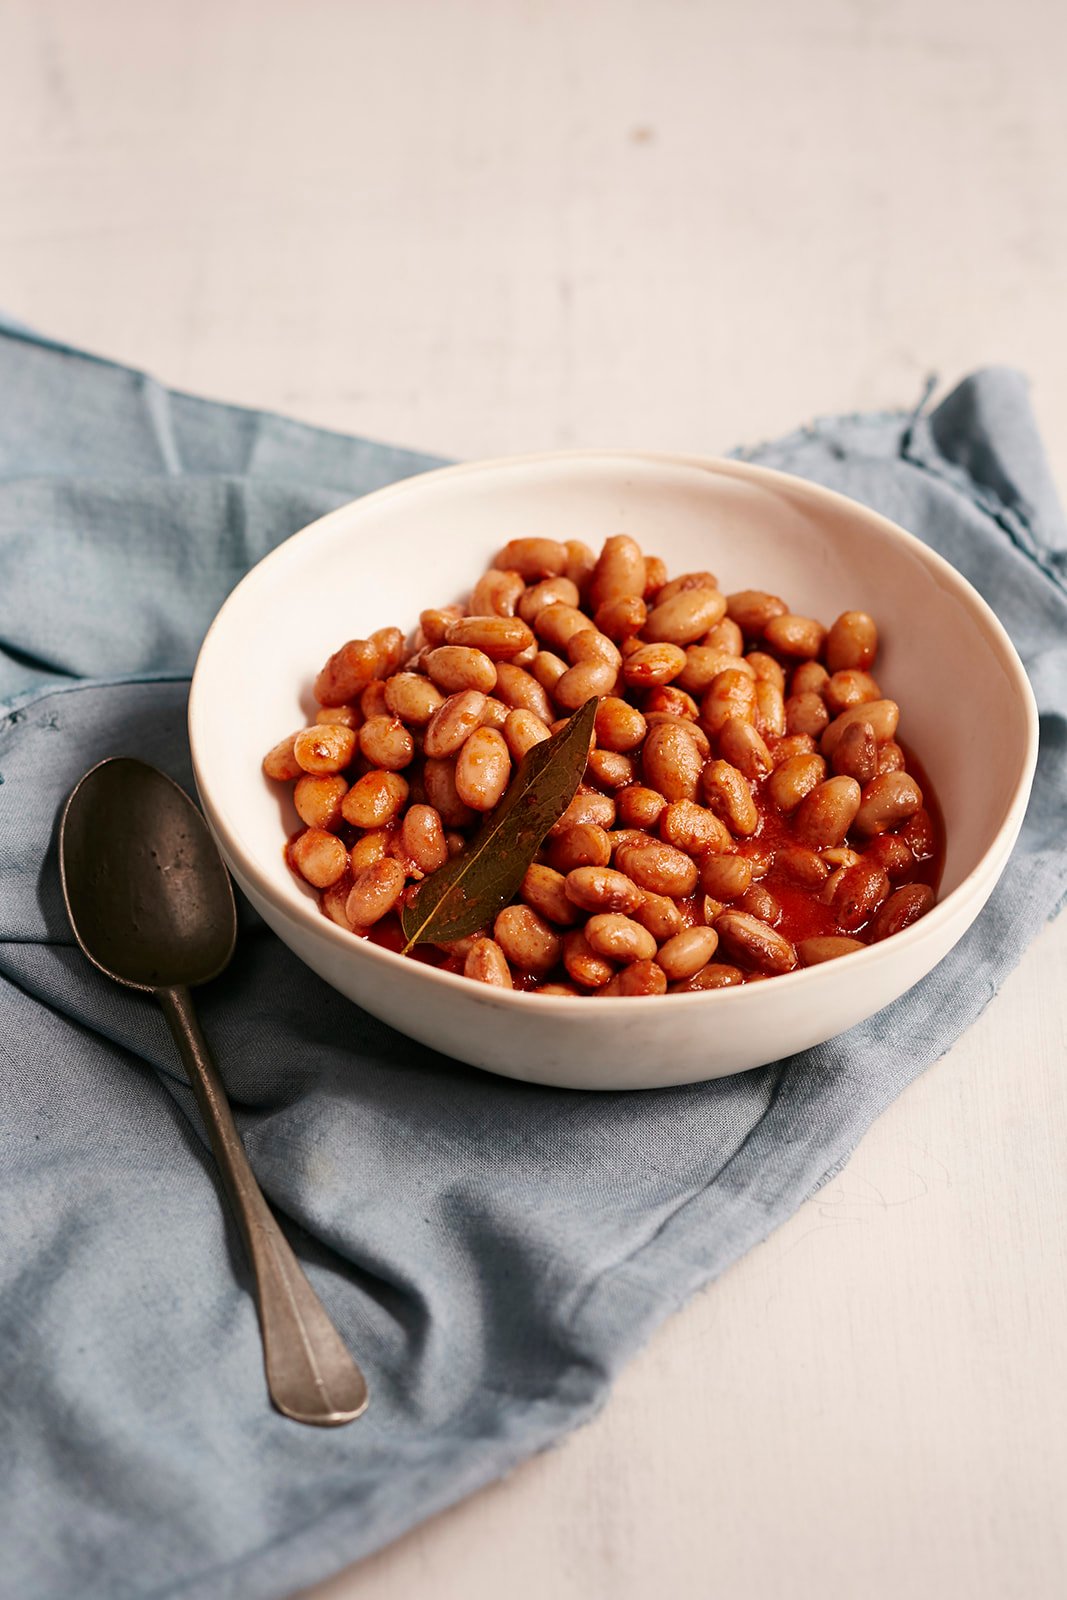 _Preserved_Italy_2619_Bottled_Beans_In_Tomato_Sauce_With_Sage_.jpg